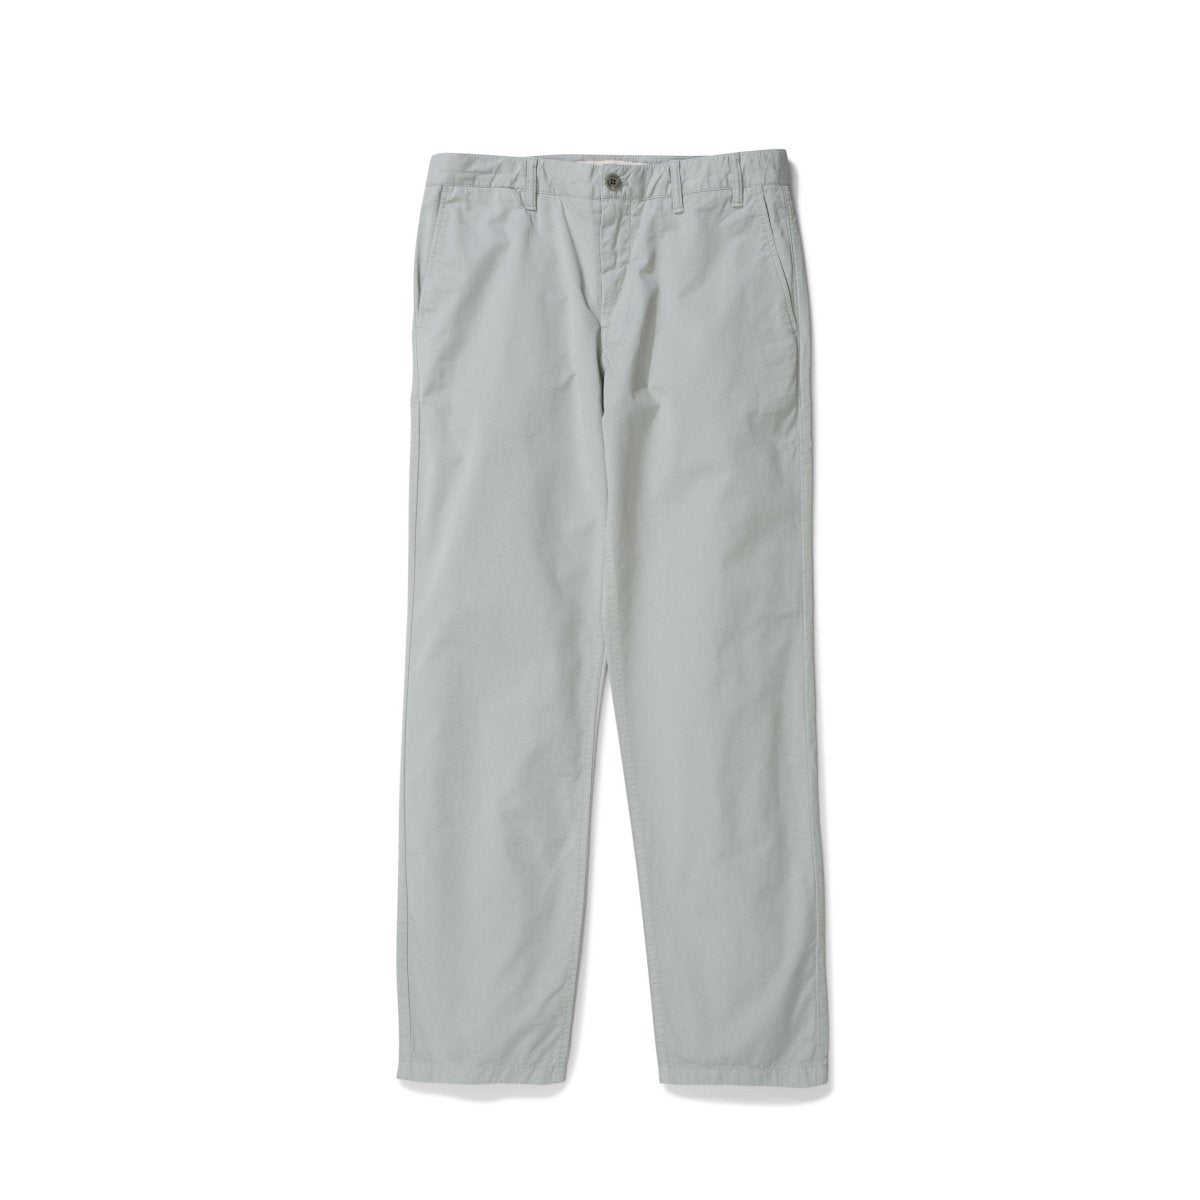 Norse Projects Aros Light Twill Pants (Grau)  - Allike Store